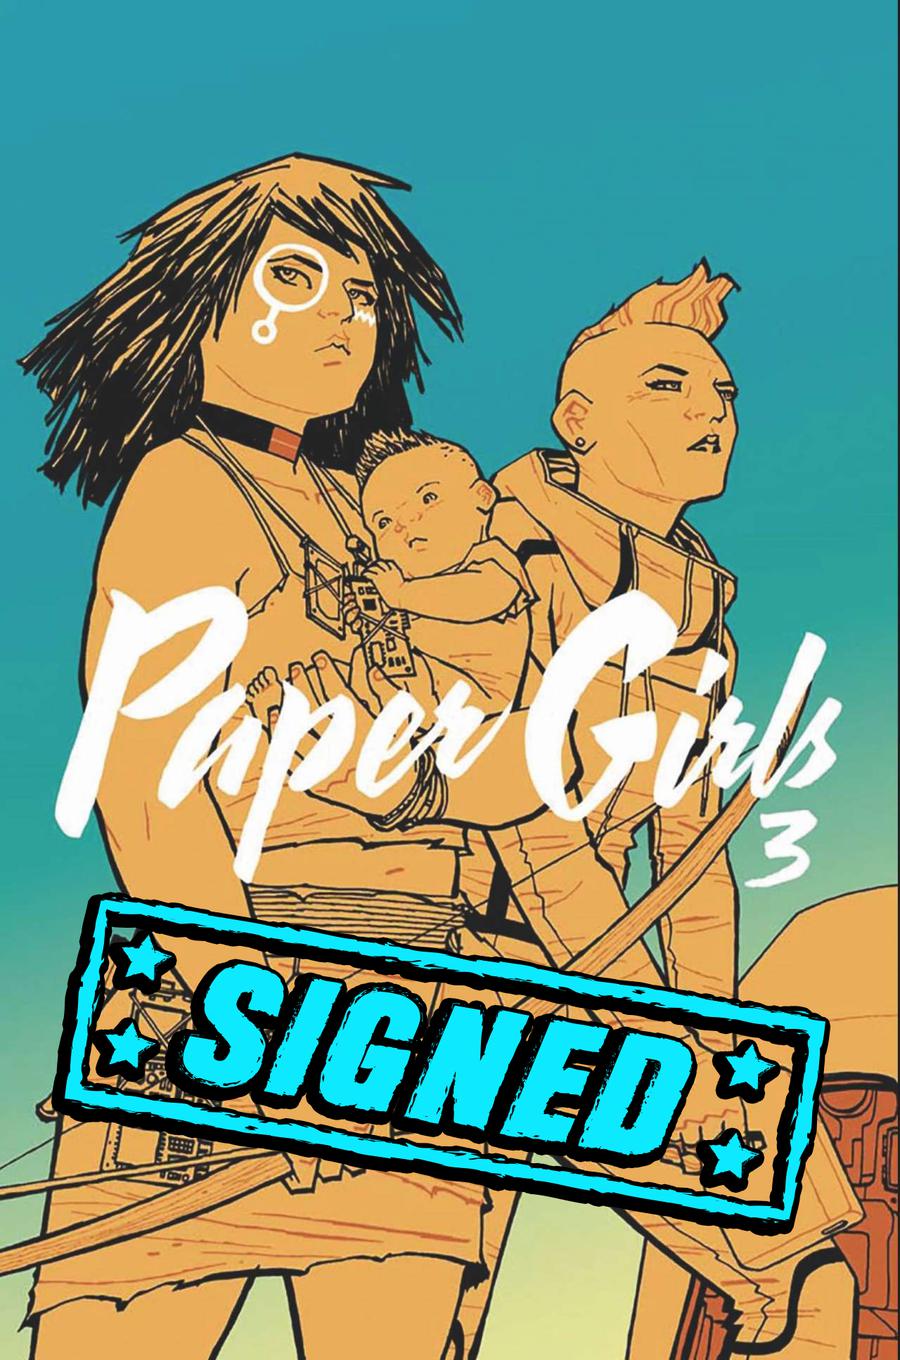 Paper Girls Vol 3 TP Signed By Brian K Vaughan & Cliff Chiang